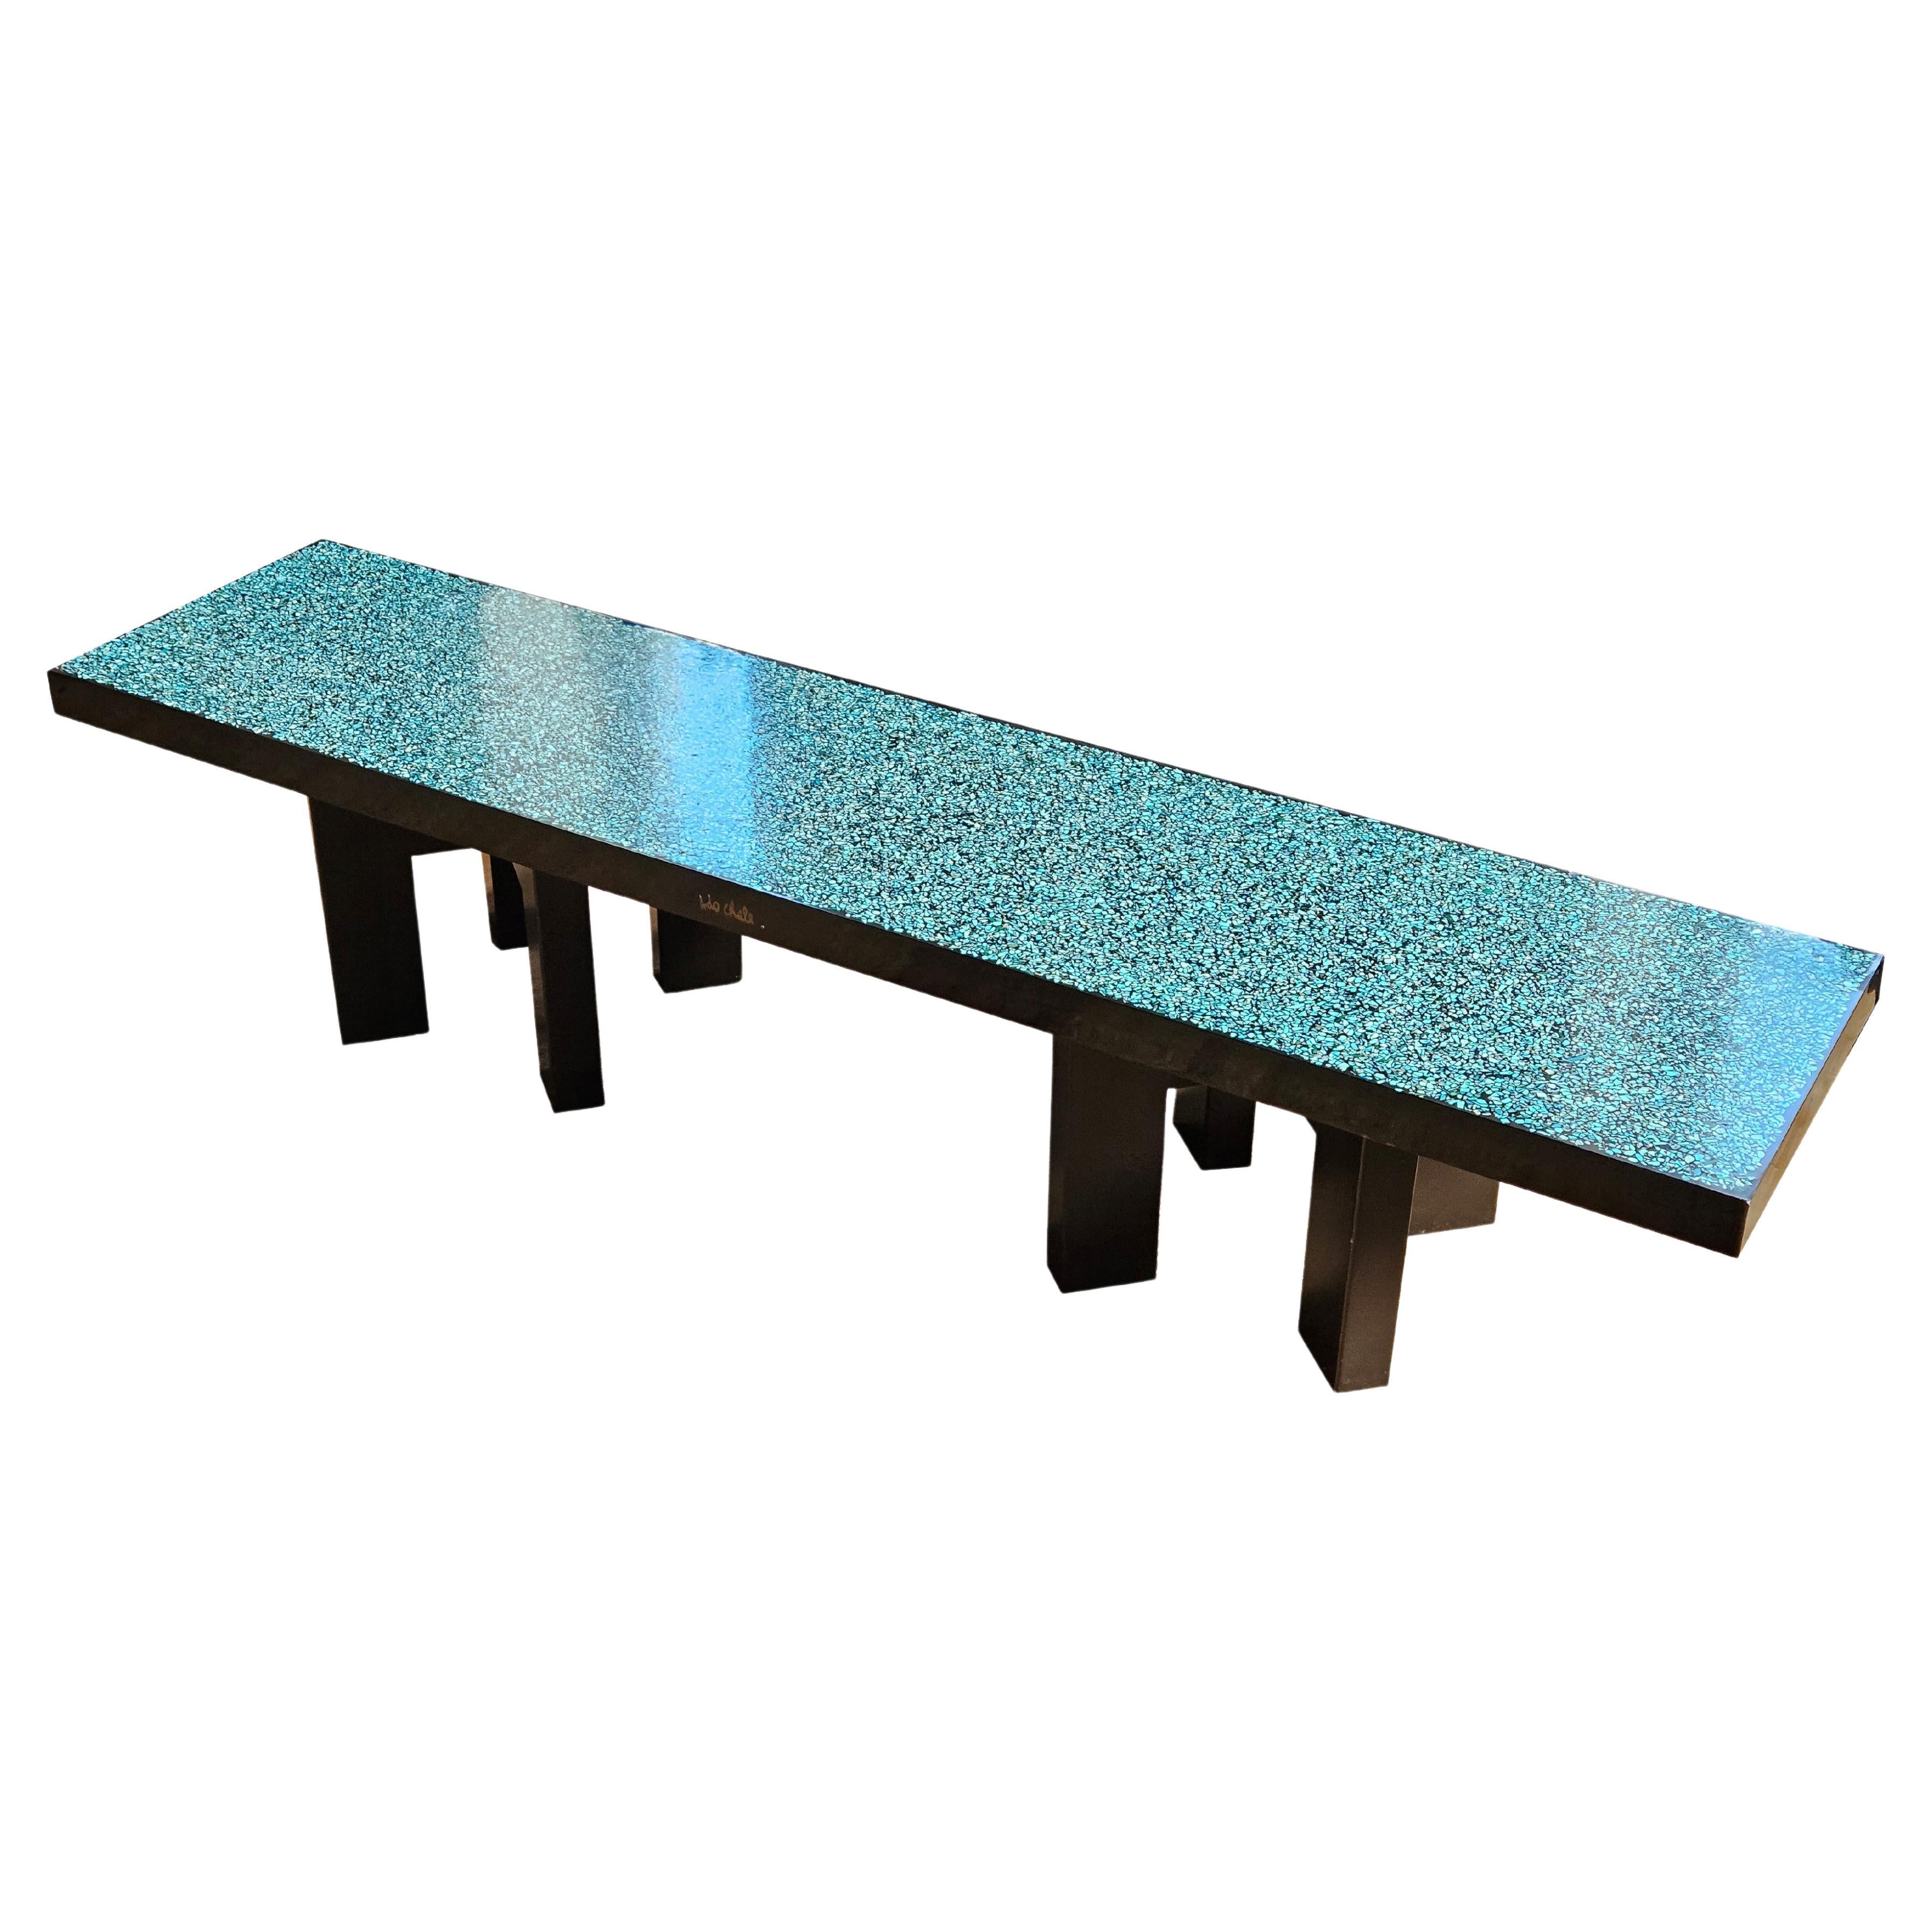 20th Century Turquoise mosaic and lacquer table by Ado Châle For Sale